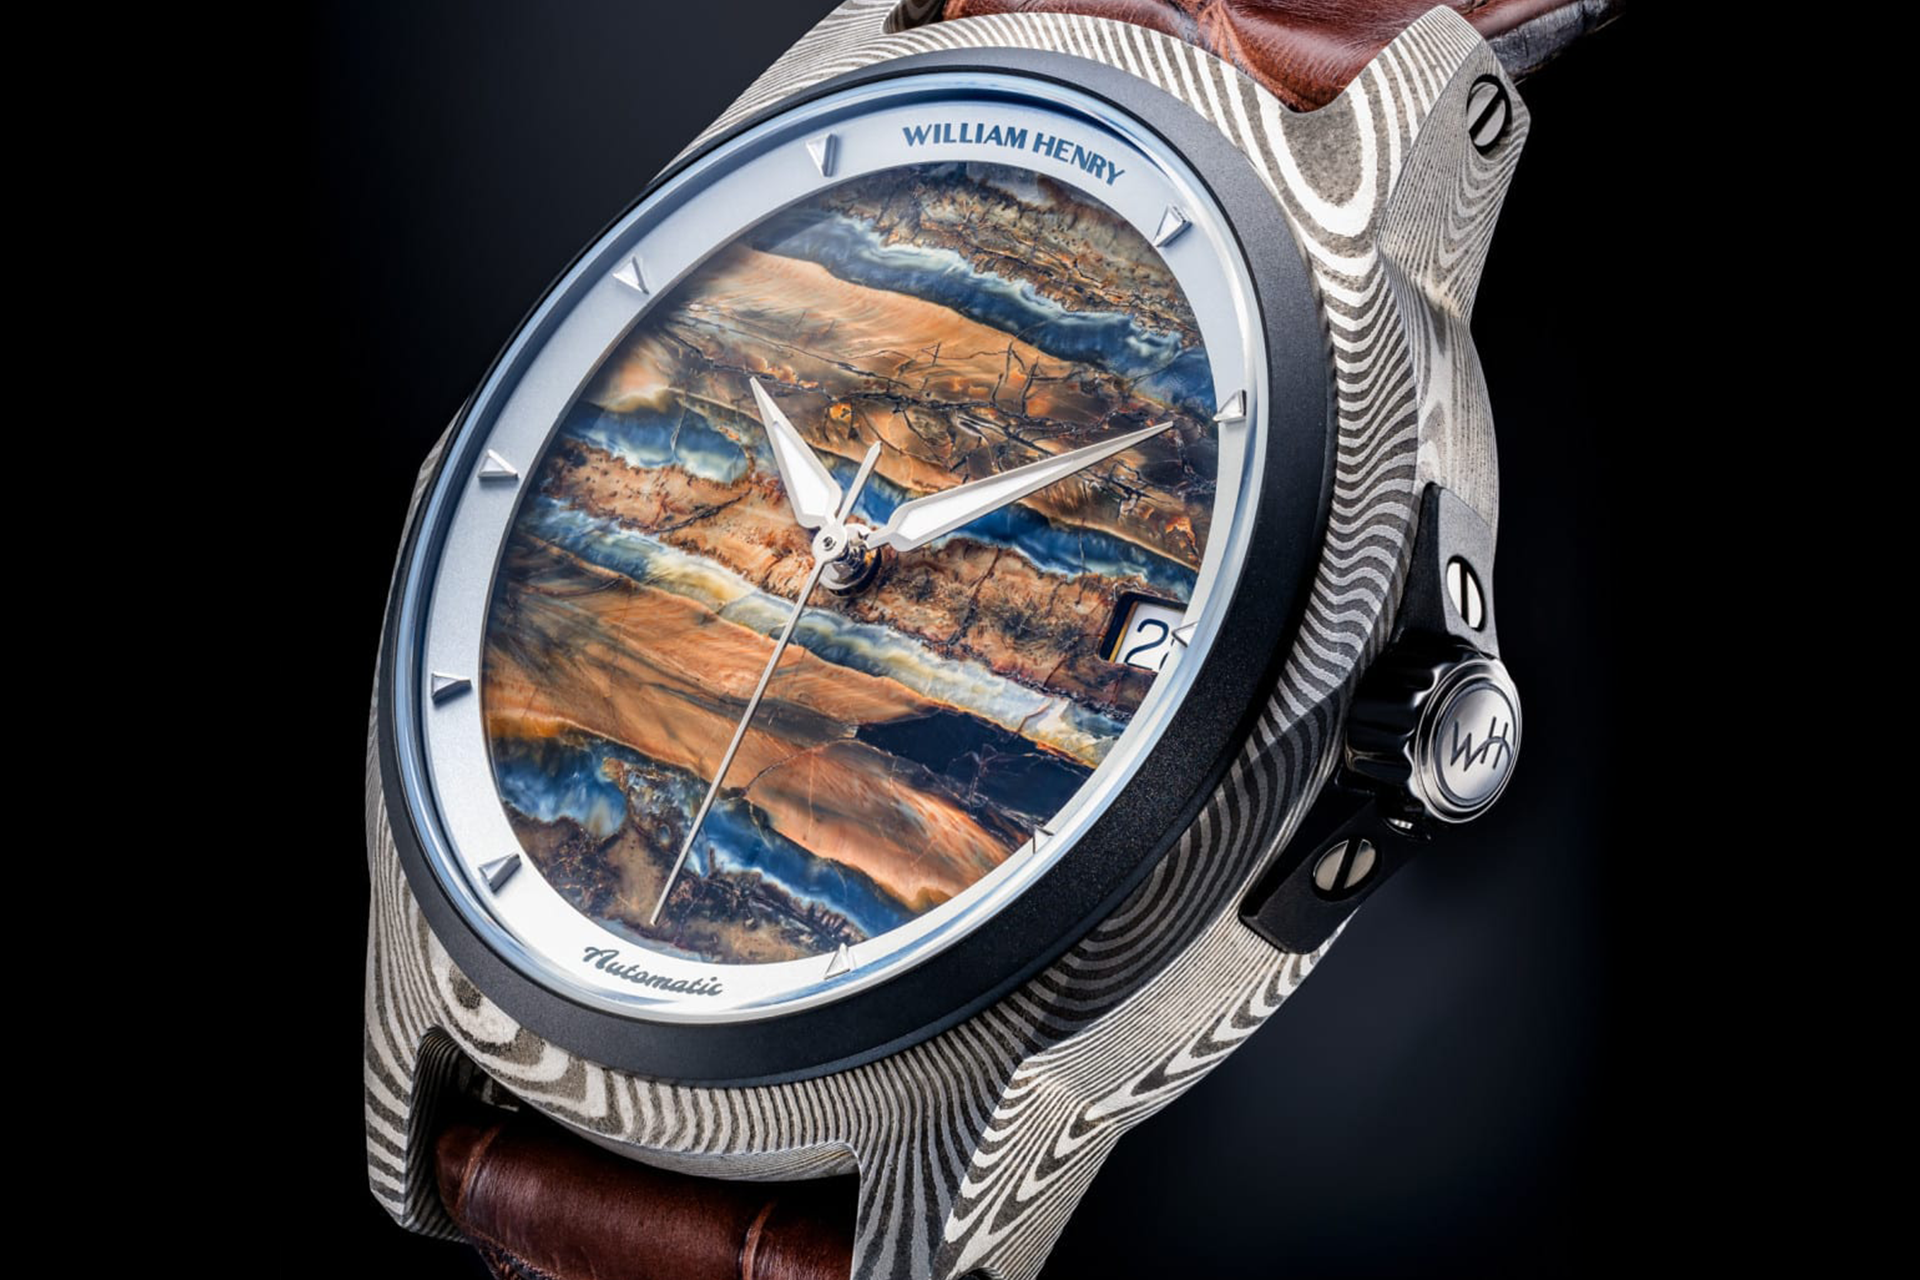 Elegant men's watch with hand made mokume-gane case and mammoth tooth fossil face by william henry 